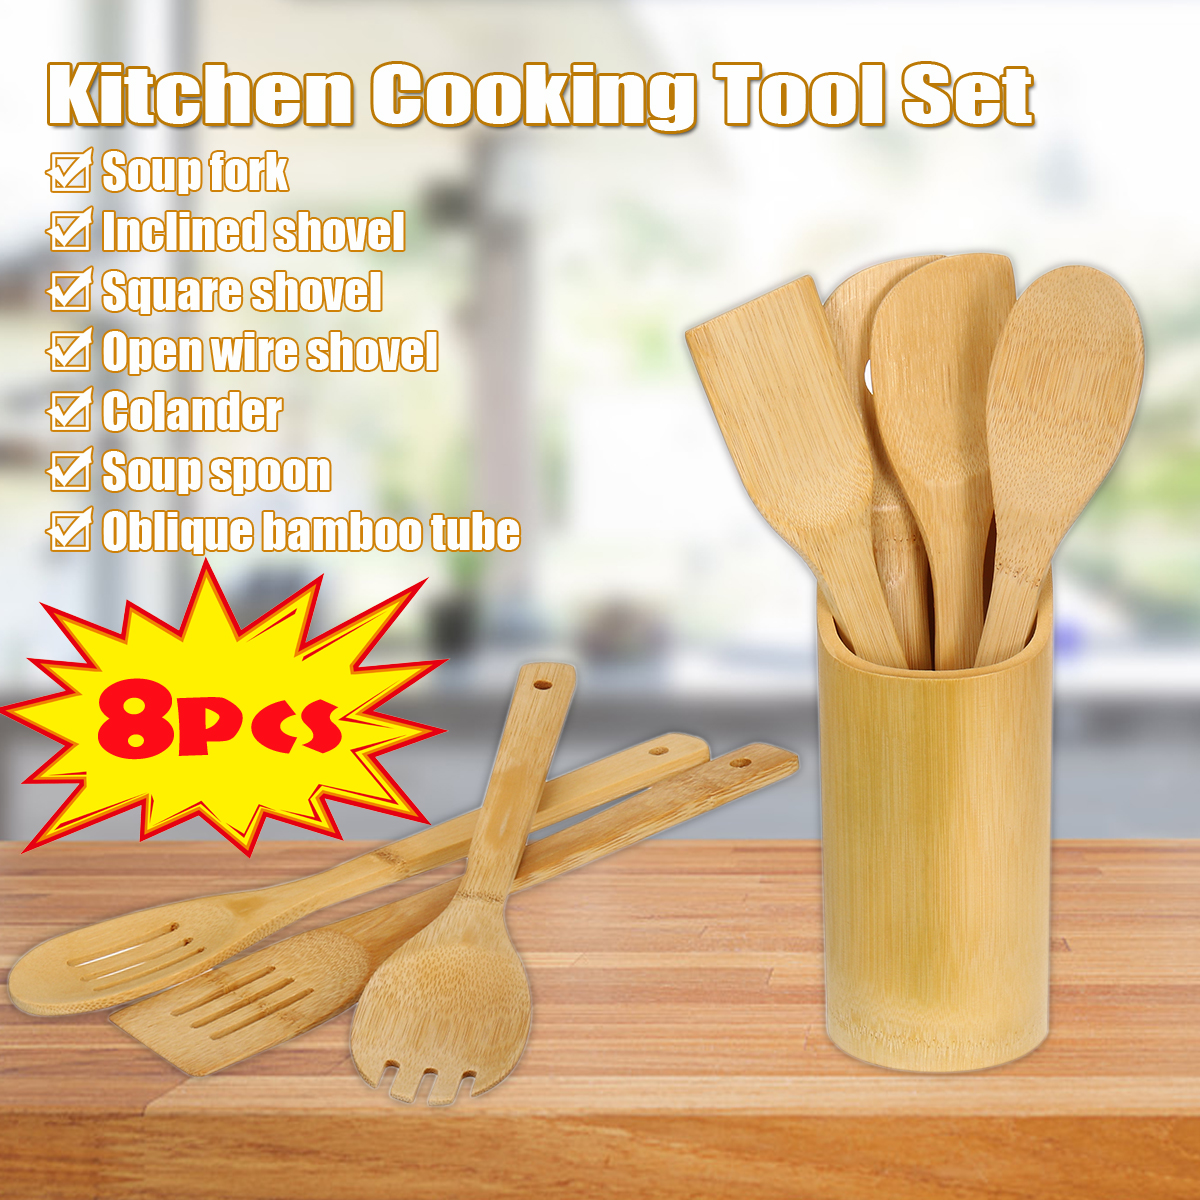 8PCS-Bamboo-Nonstick-Cooking-Utensils-Wooden-Spoons-and-Spatula-Utensil-Set-1680404-1